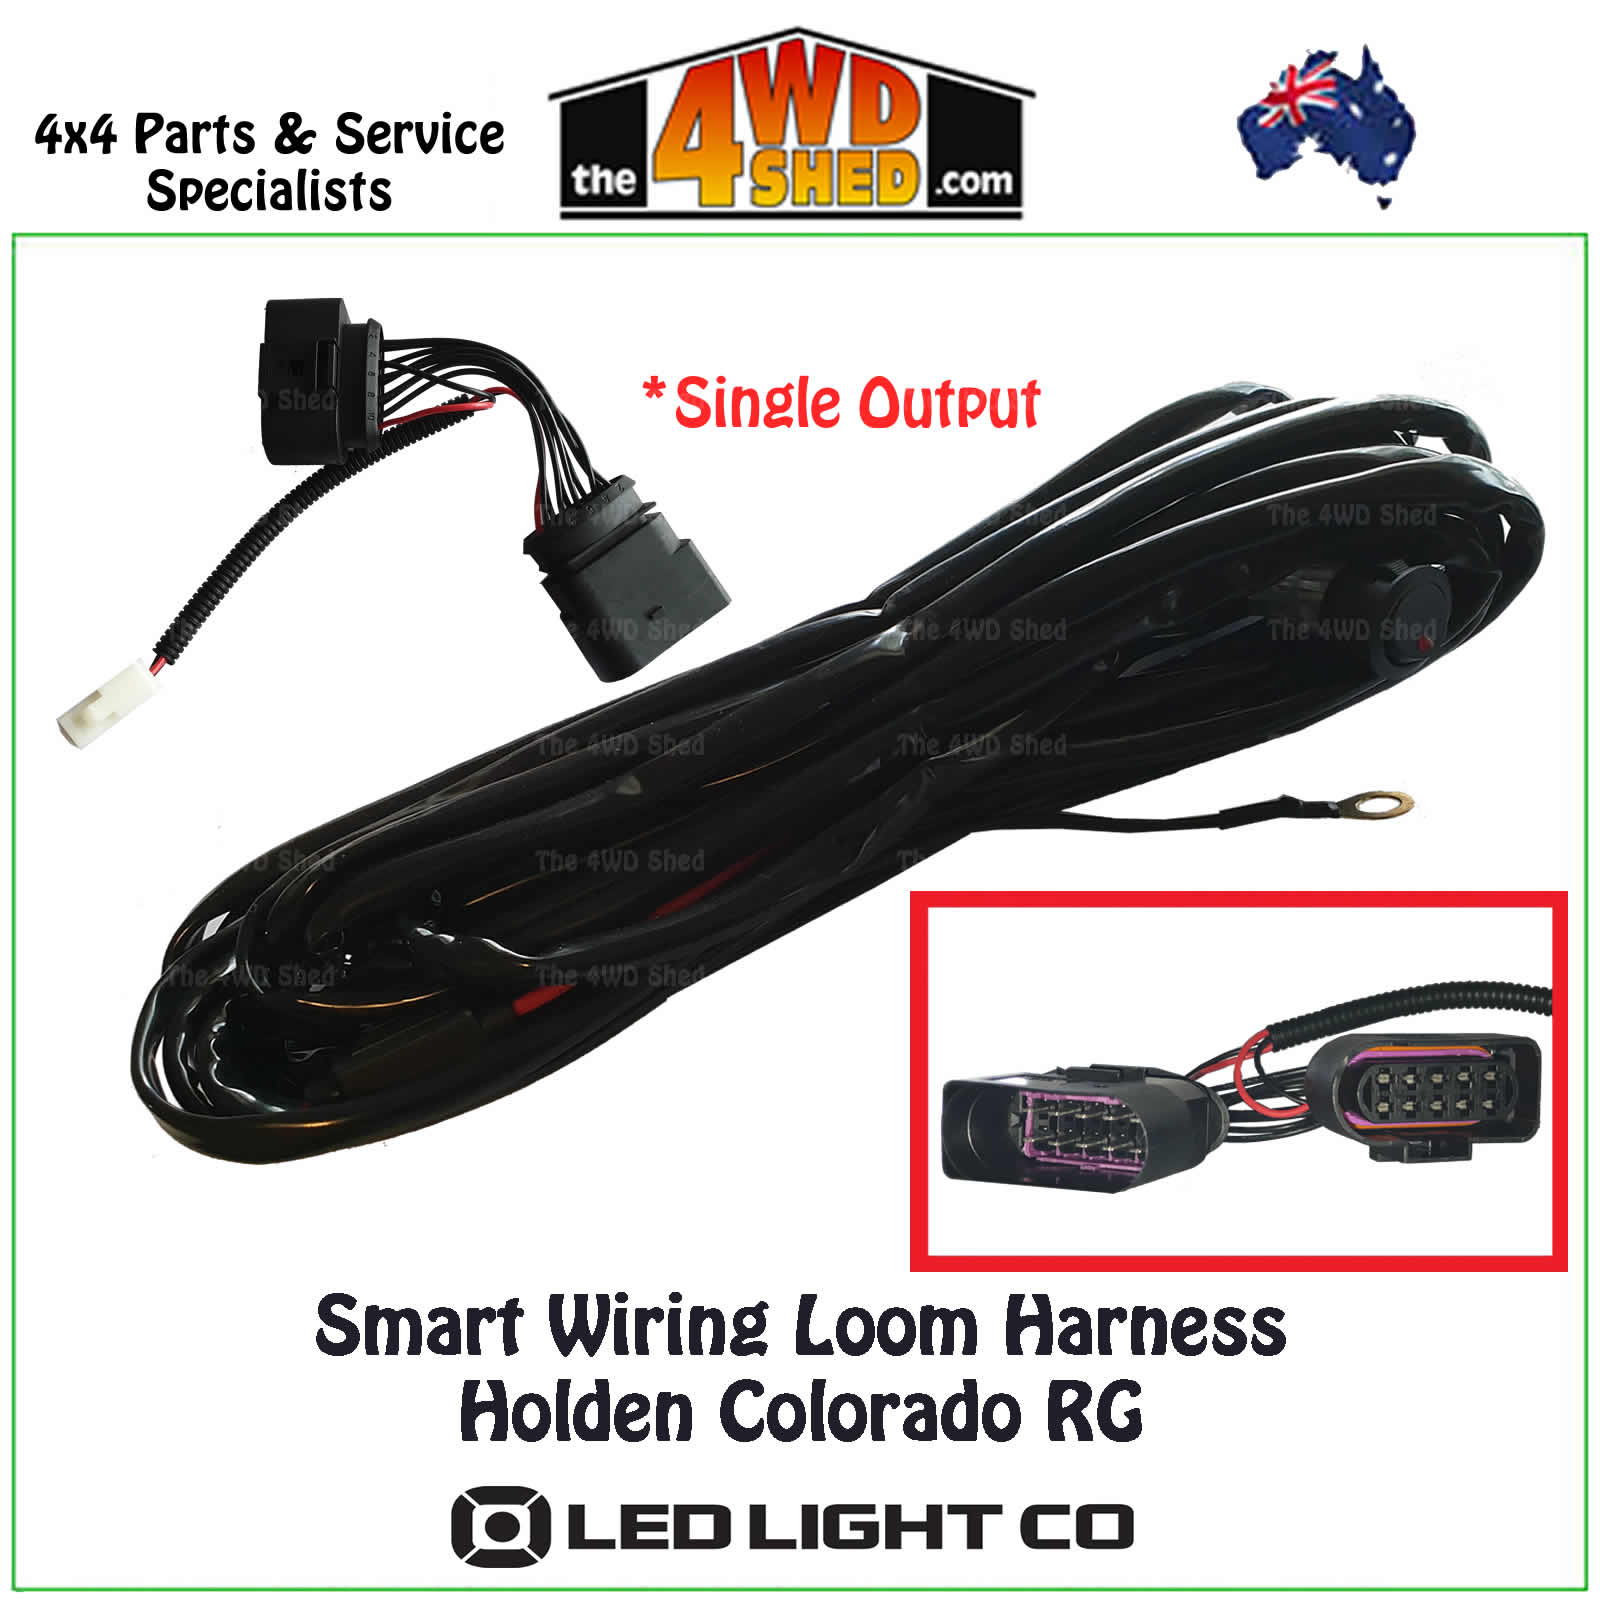 Single Output Wiring Loom Harness Holden Colorado RG Jabsco Searchlight Wiring-Diagram The 4WD Shed